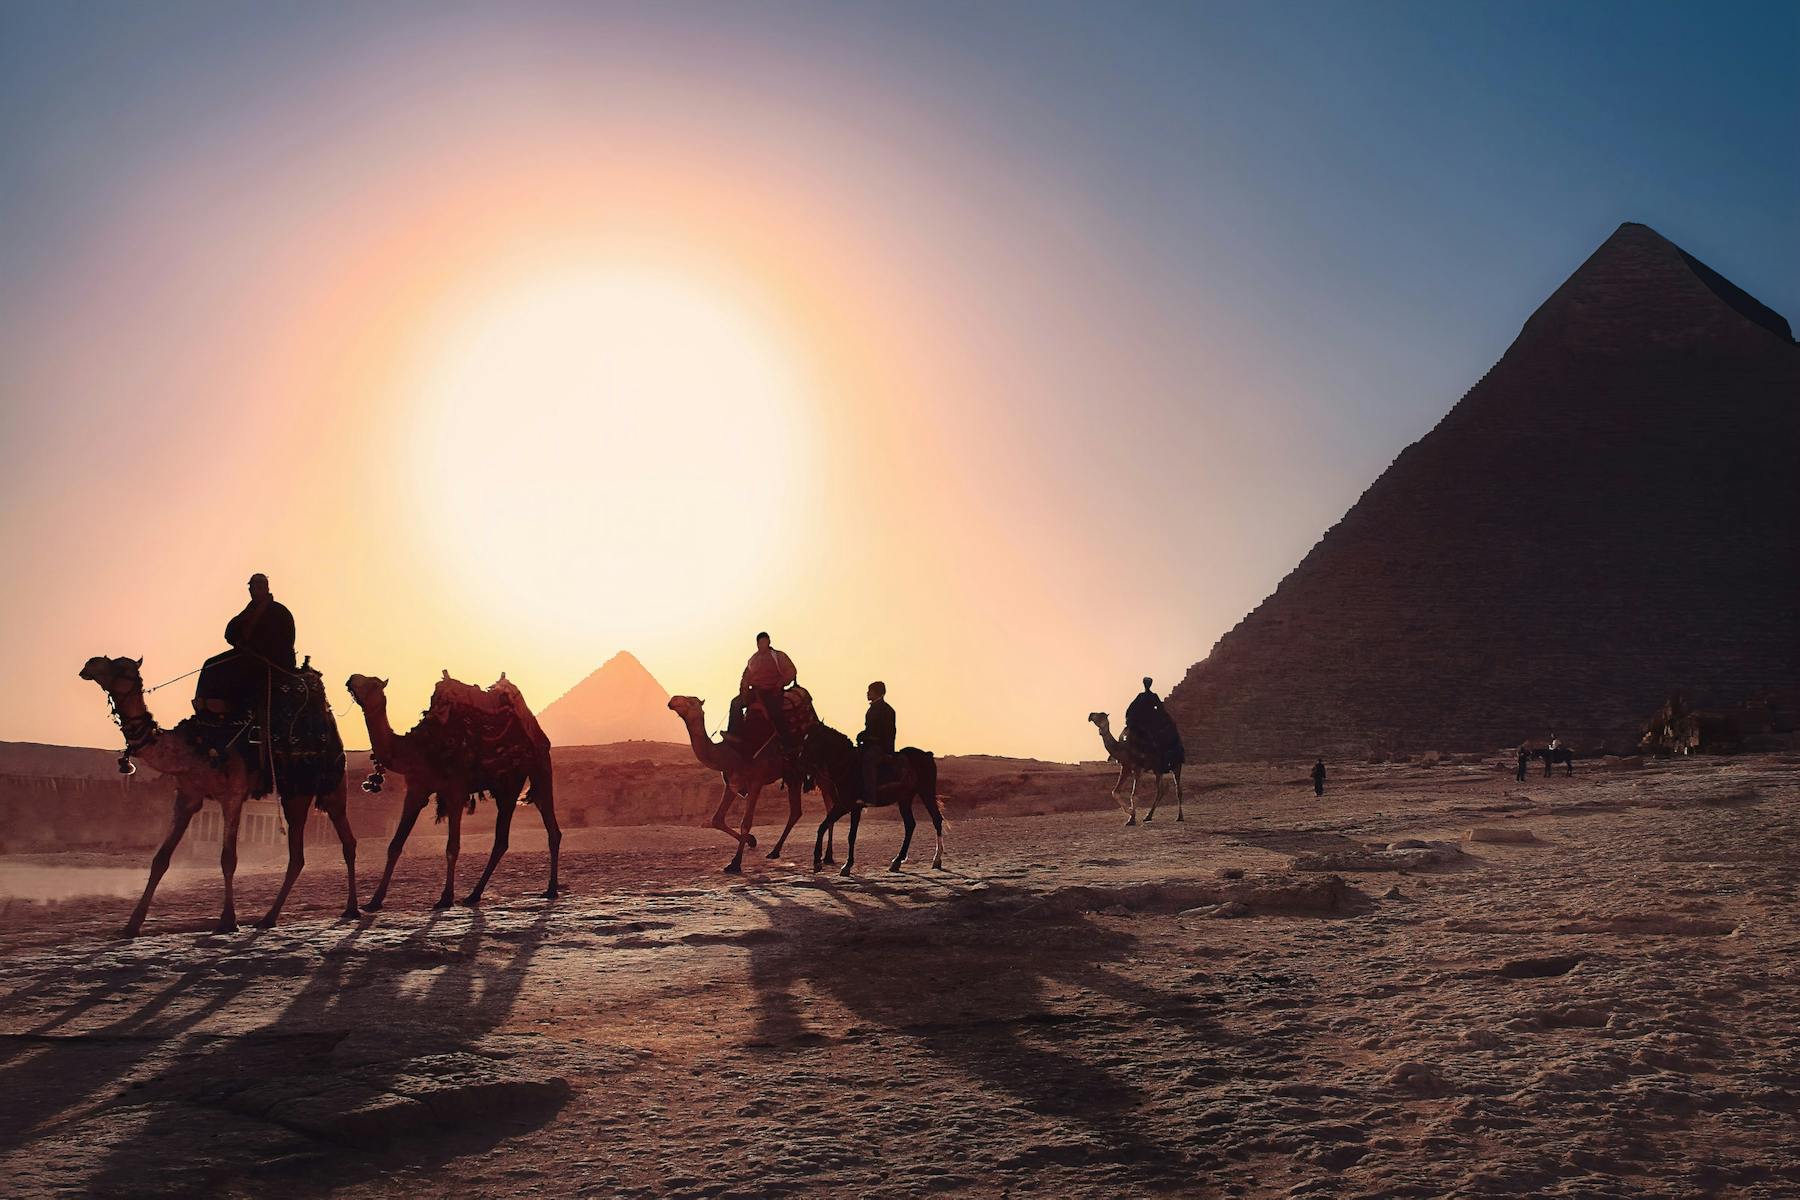 Camels striding in front of the Pyramids of Giza in Egypt.